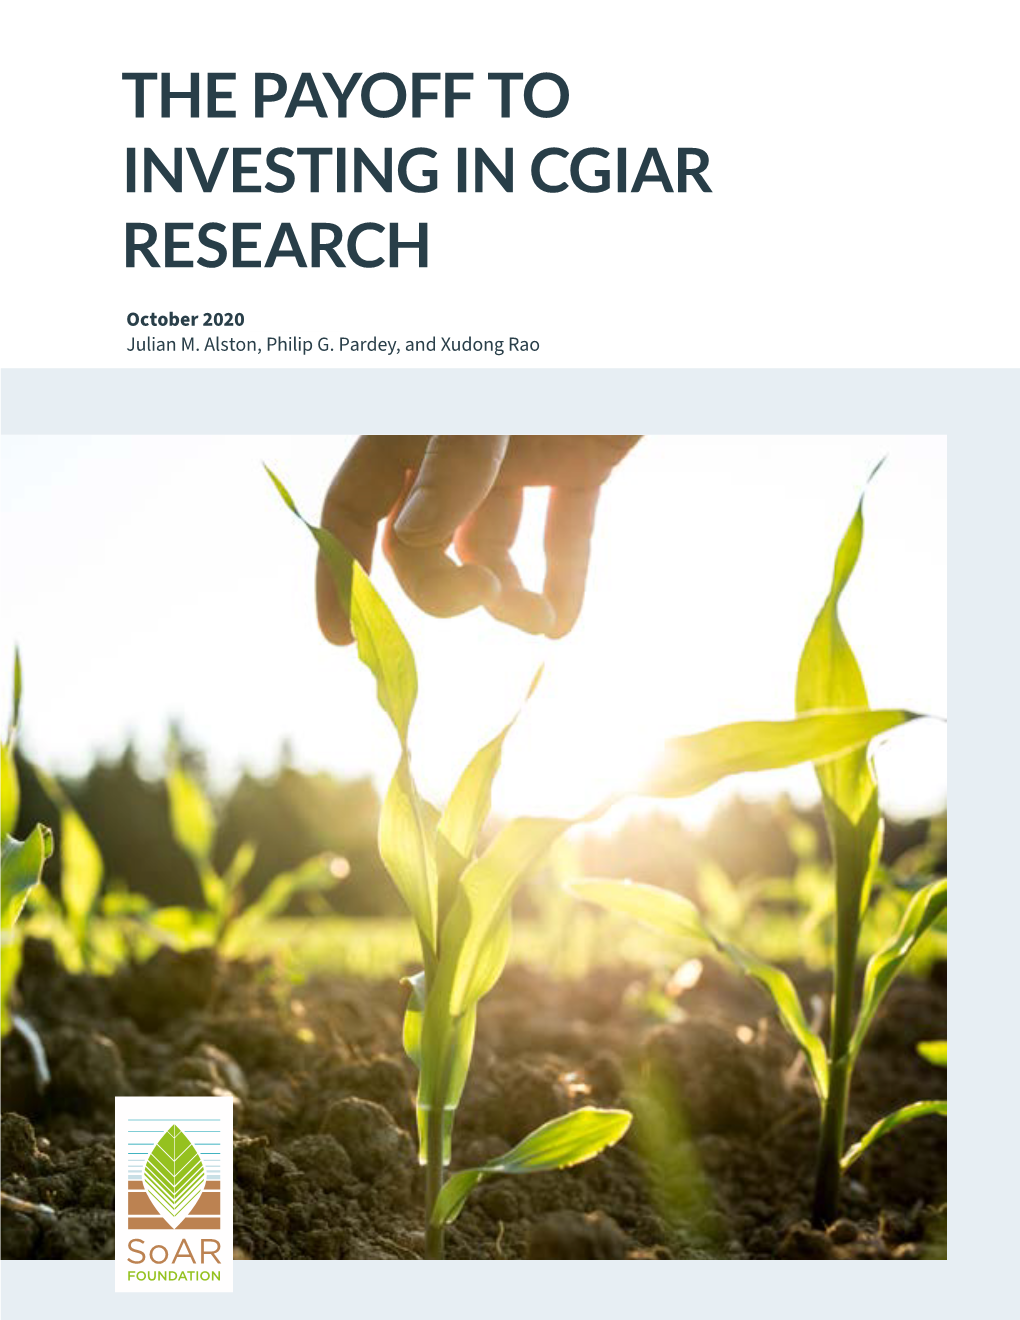 The Payoff to Investing in Cgiar Research